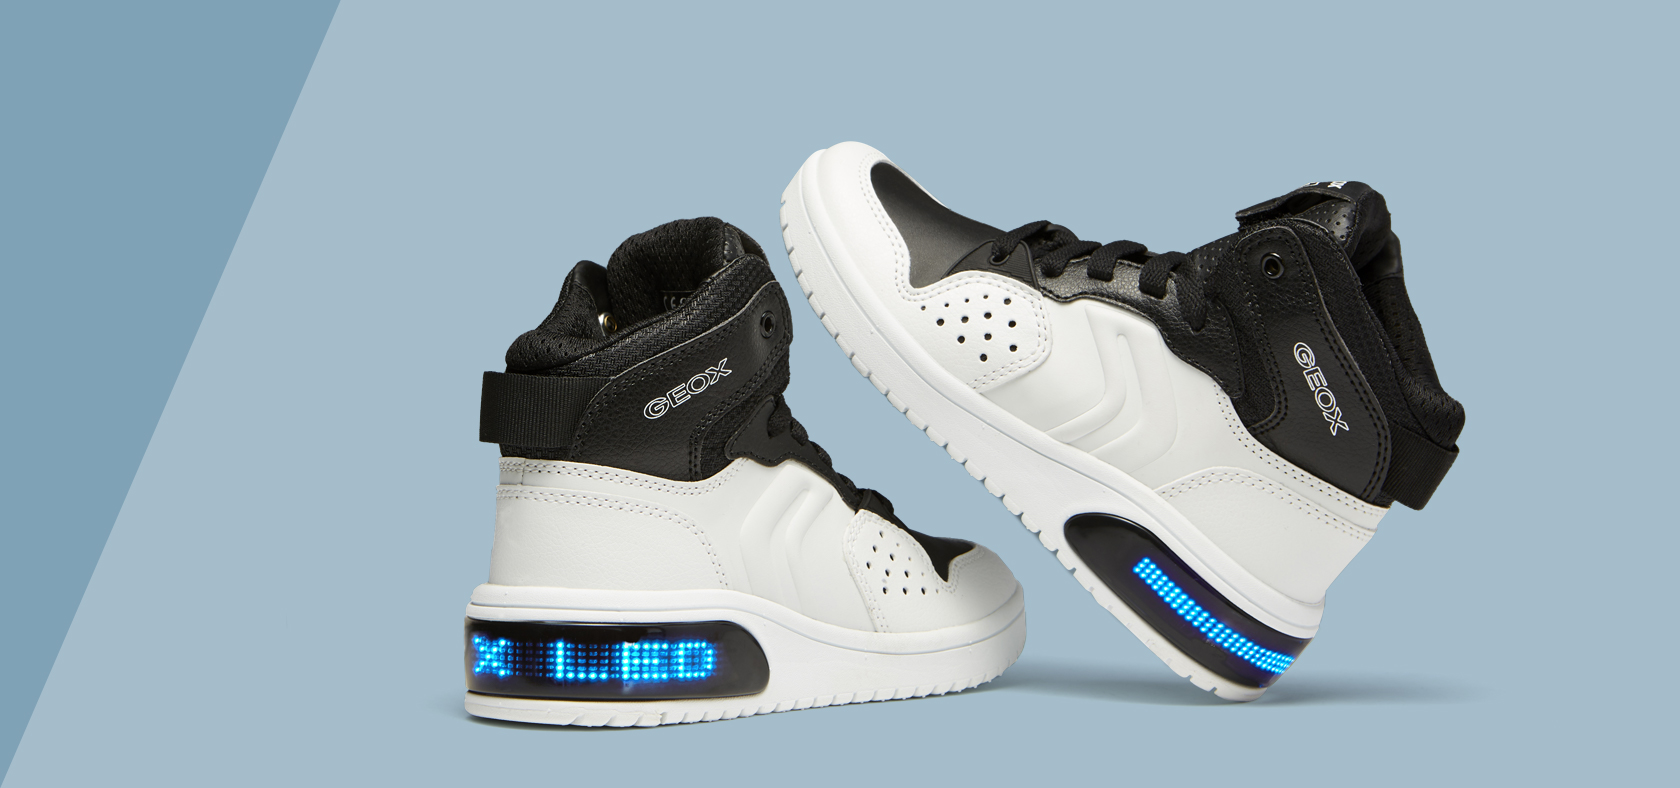 geox led trainers